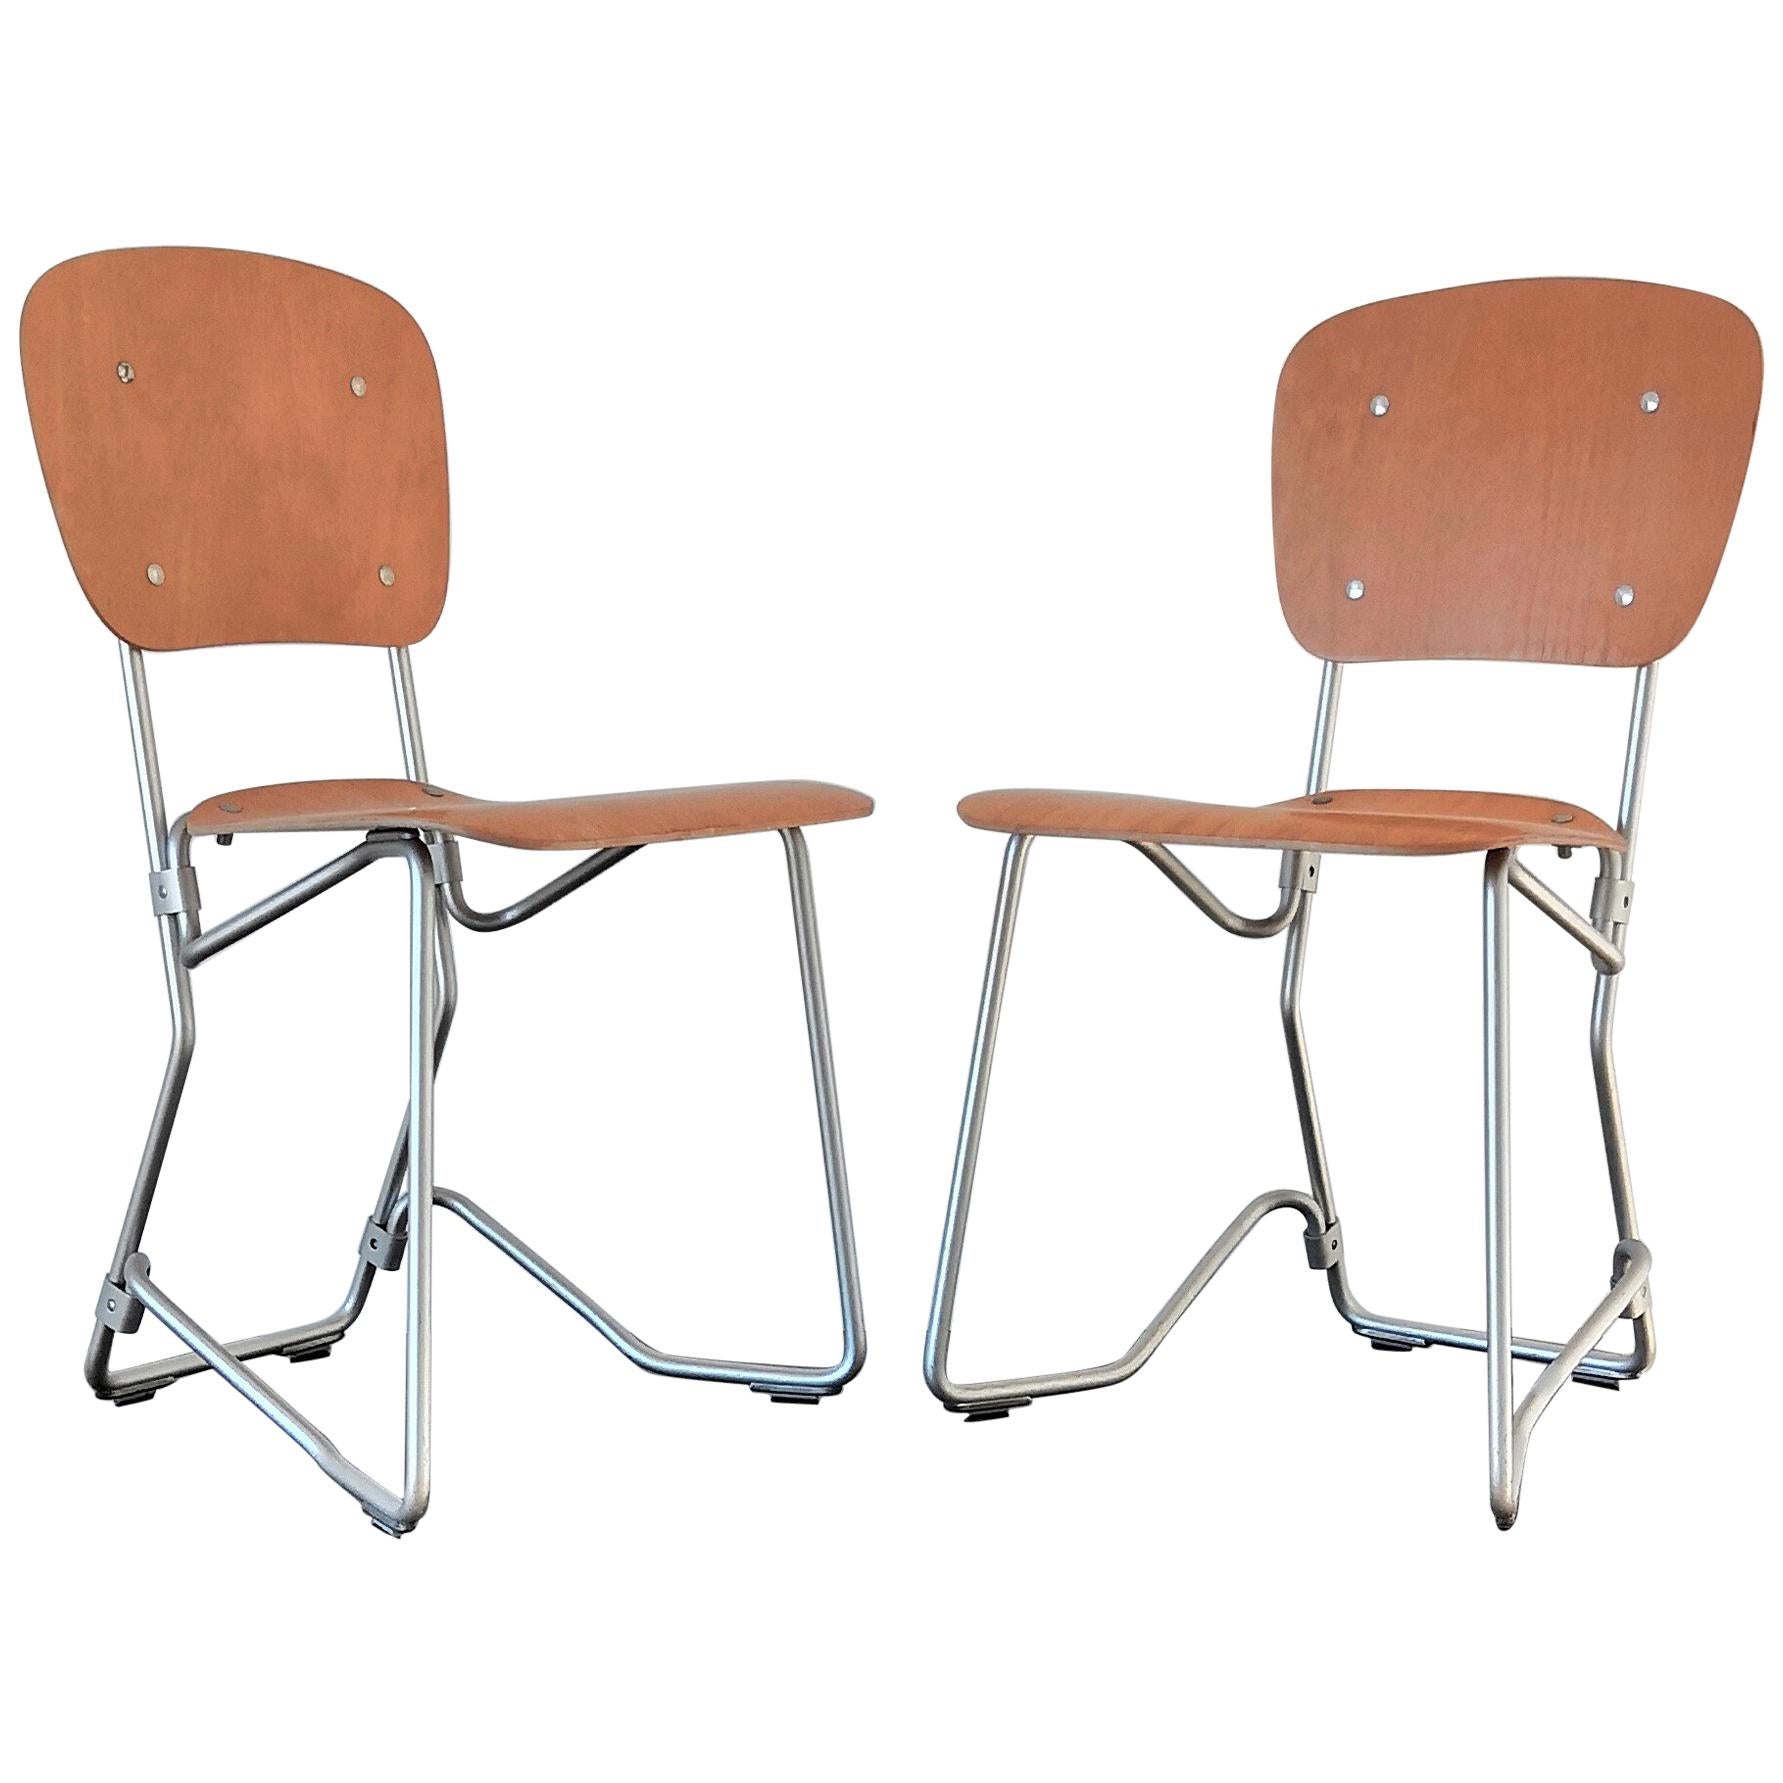 Pair of Elm Plywood and Aluminum Stackable Chairs by Armin Wirth, 1950s